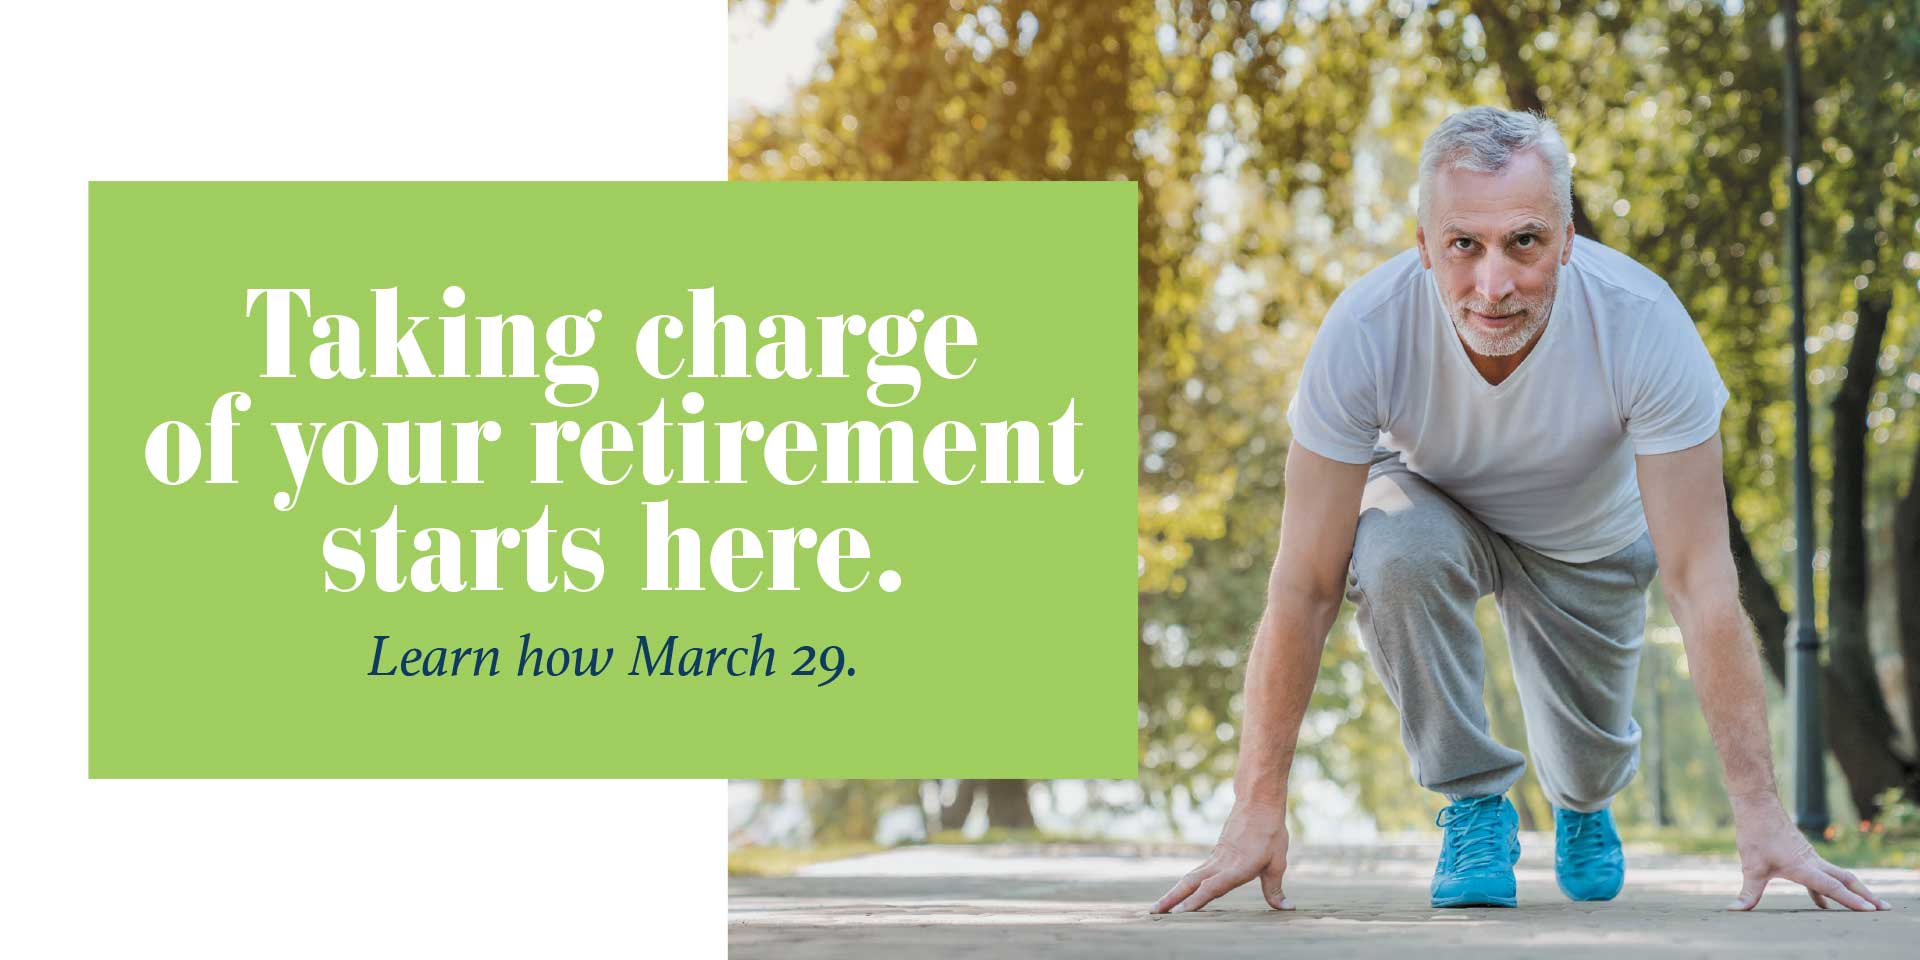 Taking charge of your retirement starts here.